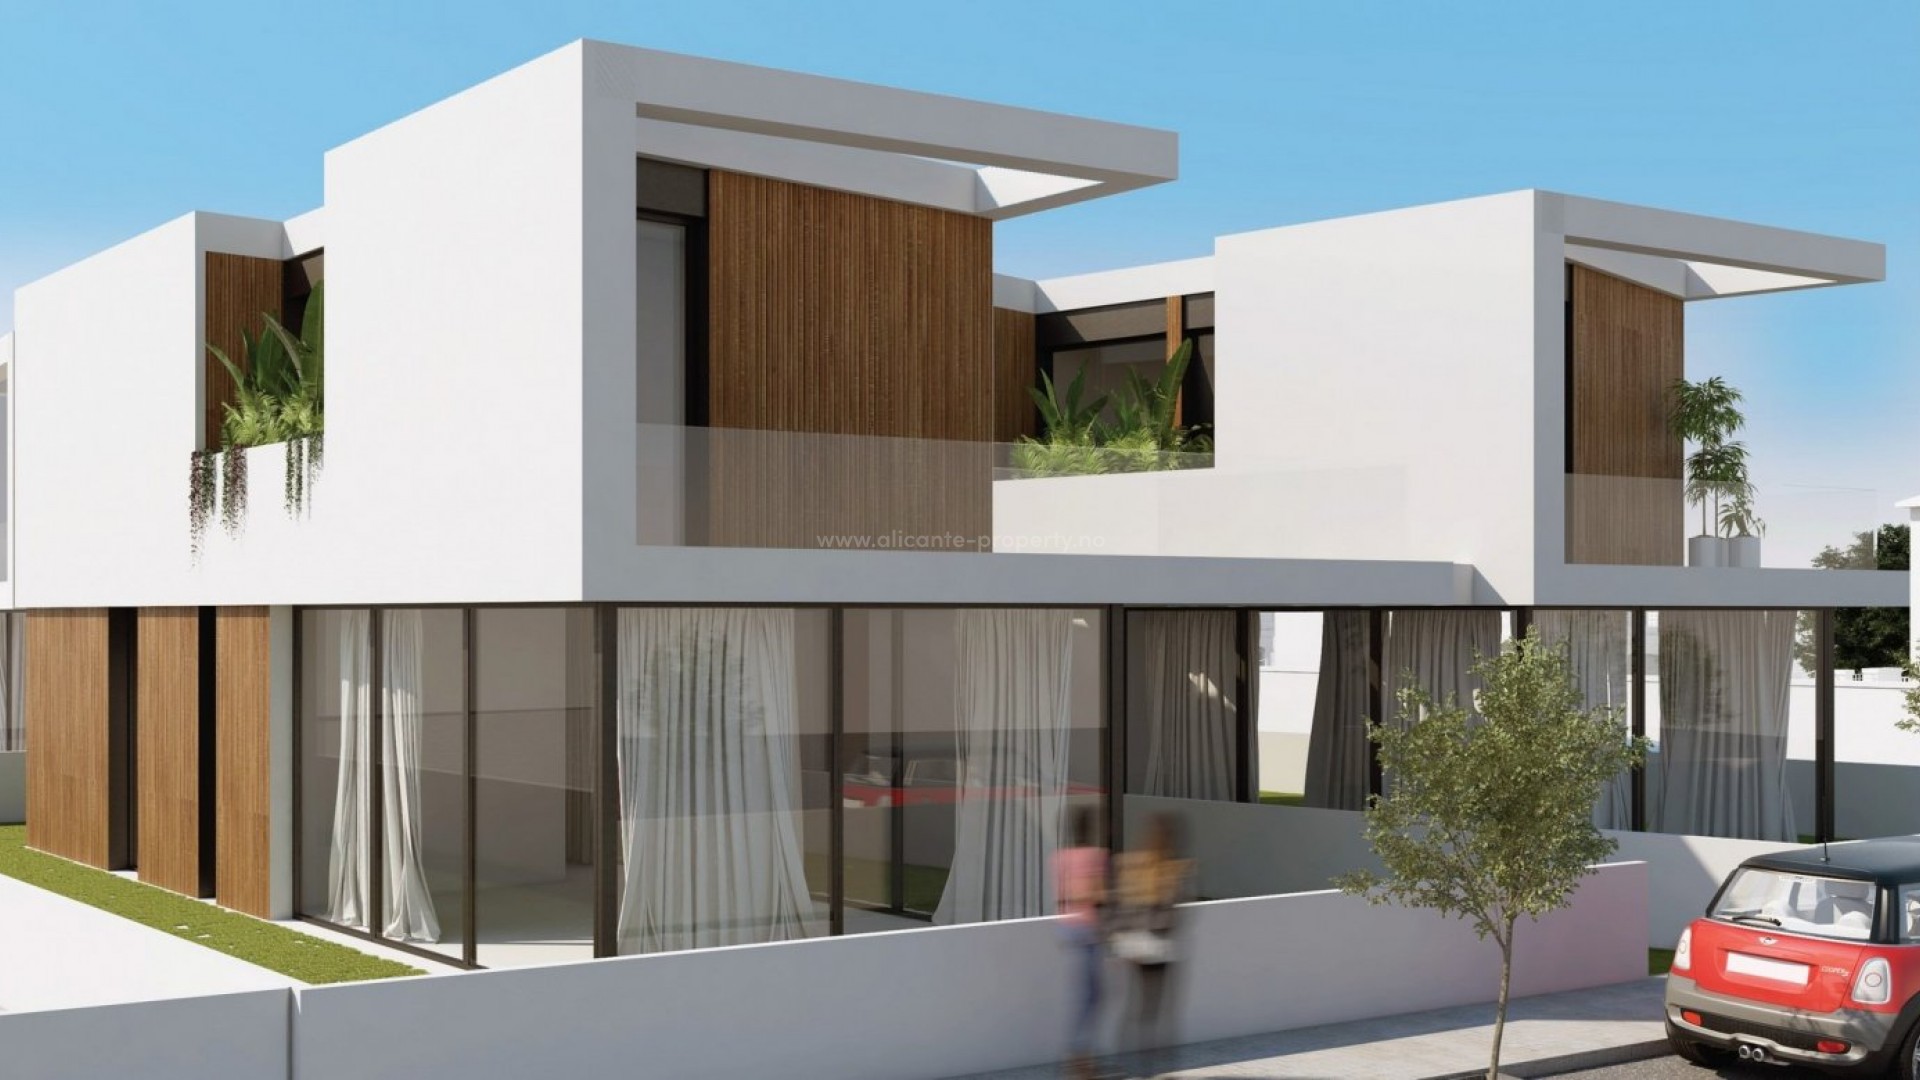 Exclusive houses/villas in Torre de La Horadada, 3 bedrooms, 3 bathrooms, 300 meters from the beach, garden with private pool, solarium and possibility of basement